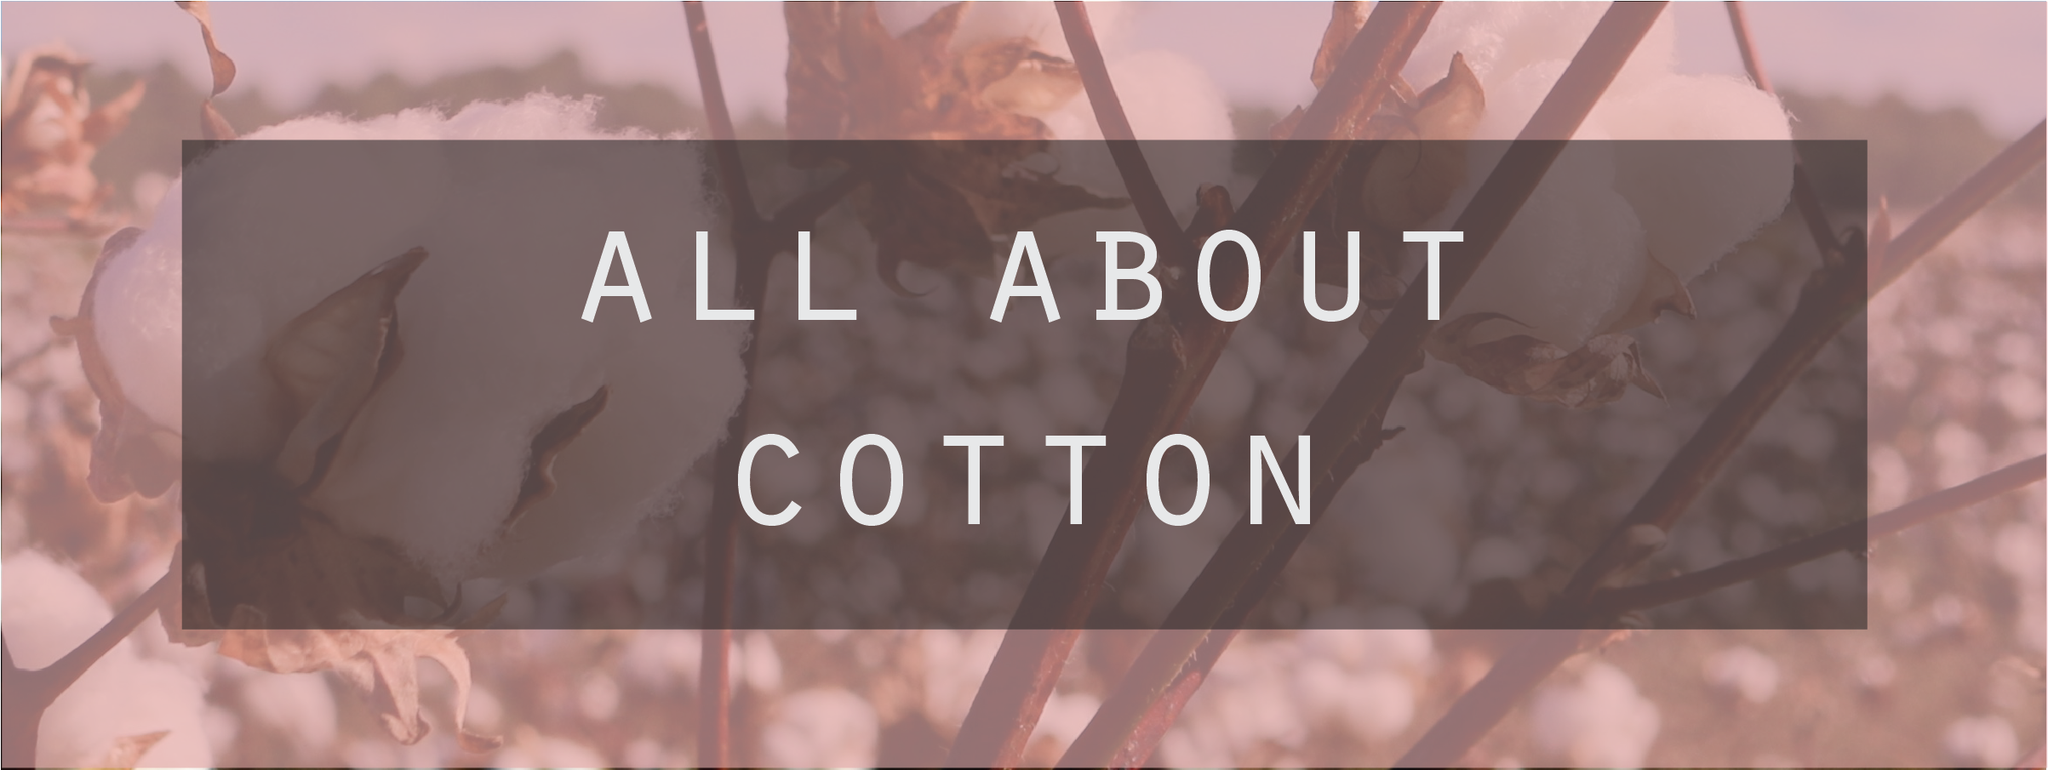 All About Cotton  Why is Cotton so great? - Kade & Vos